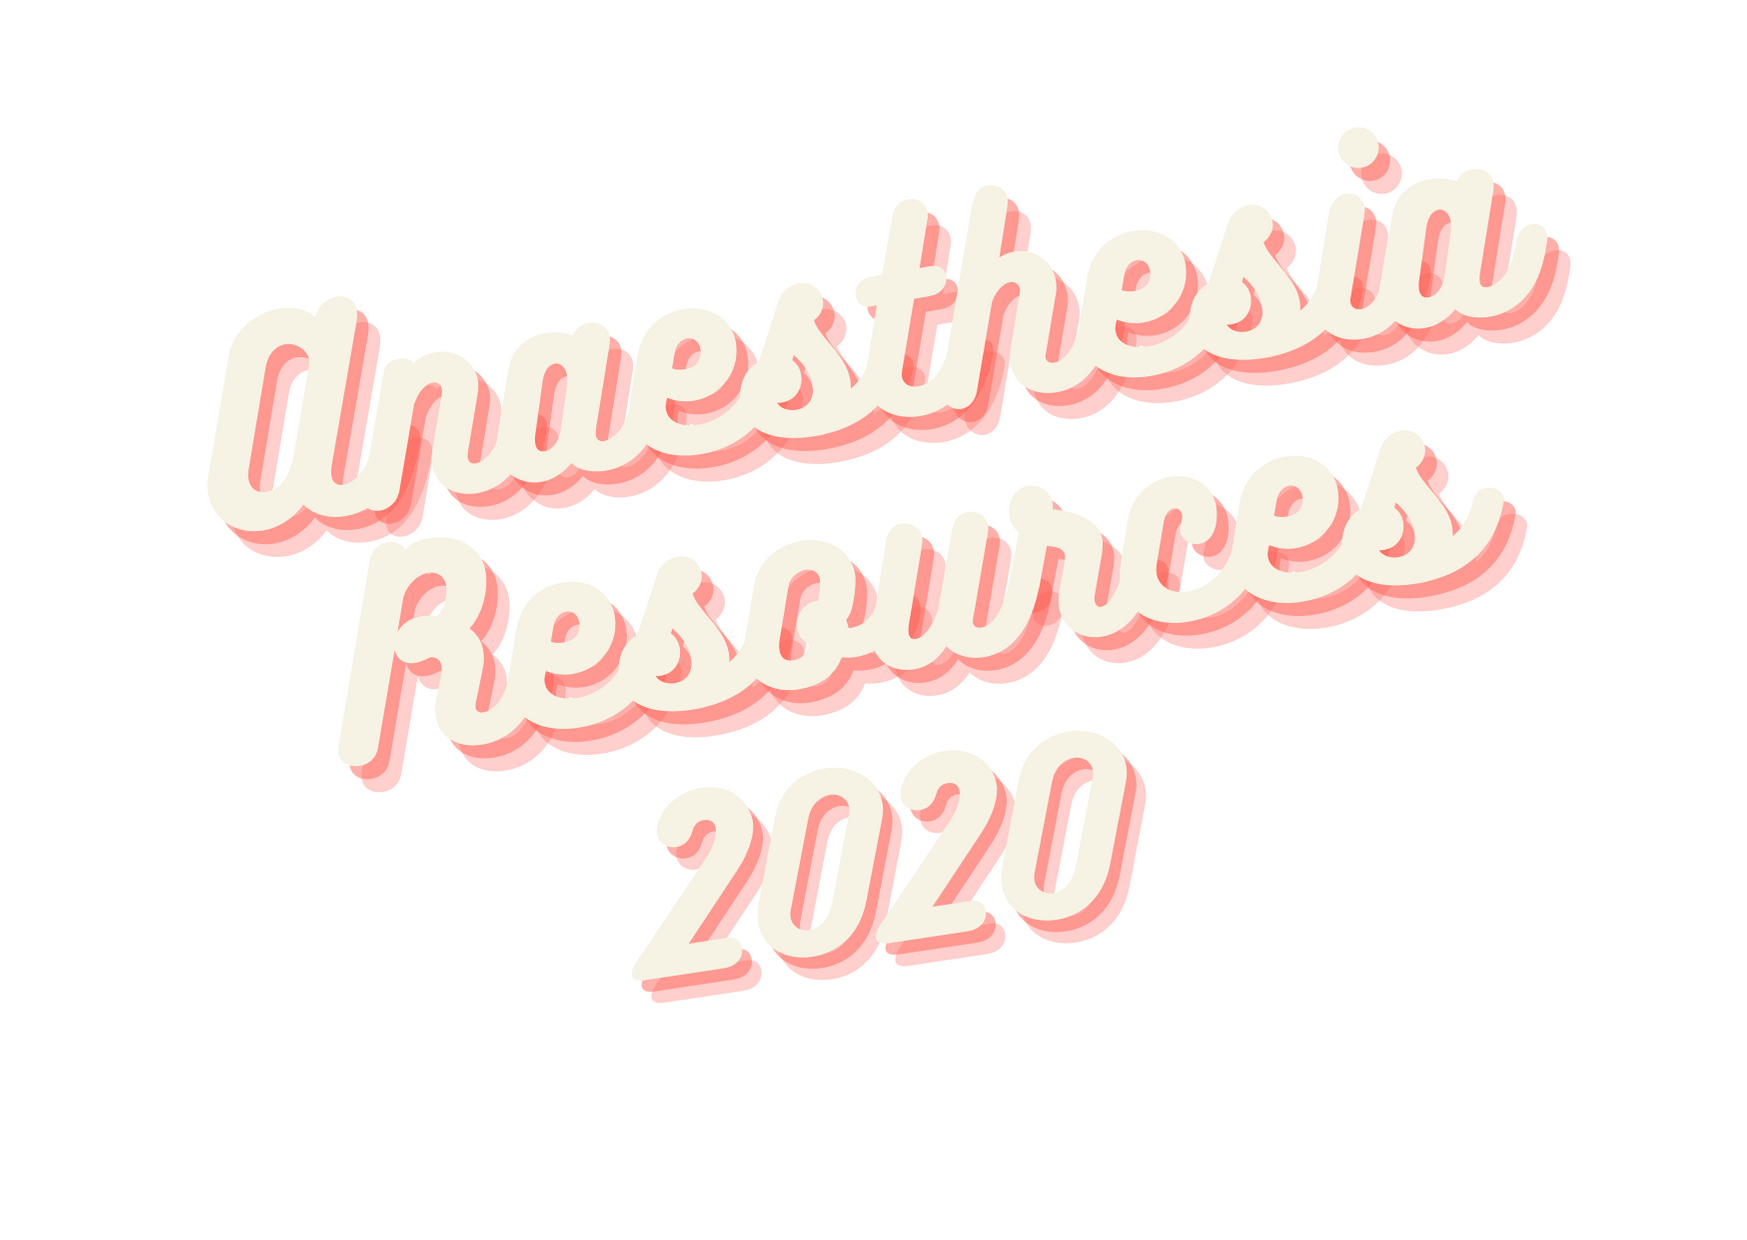 Our favourite anaesthesia resources in 2020